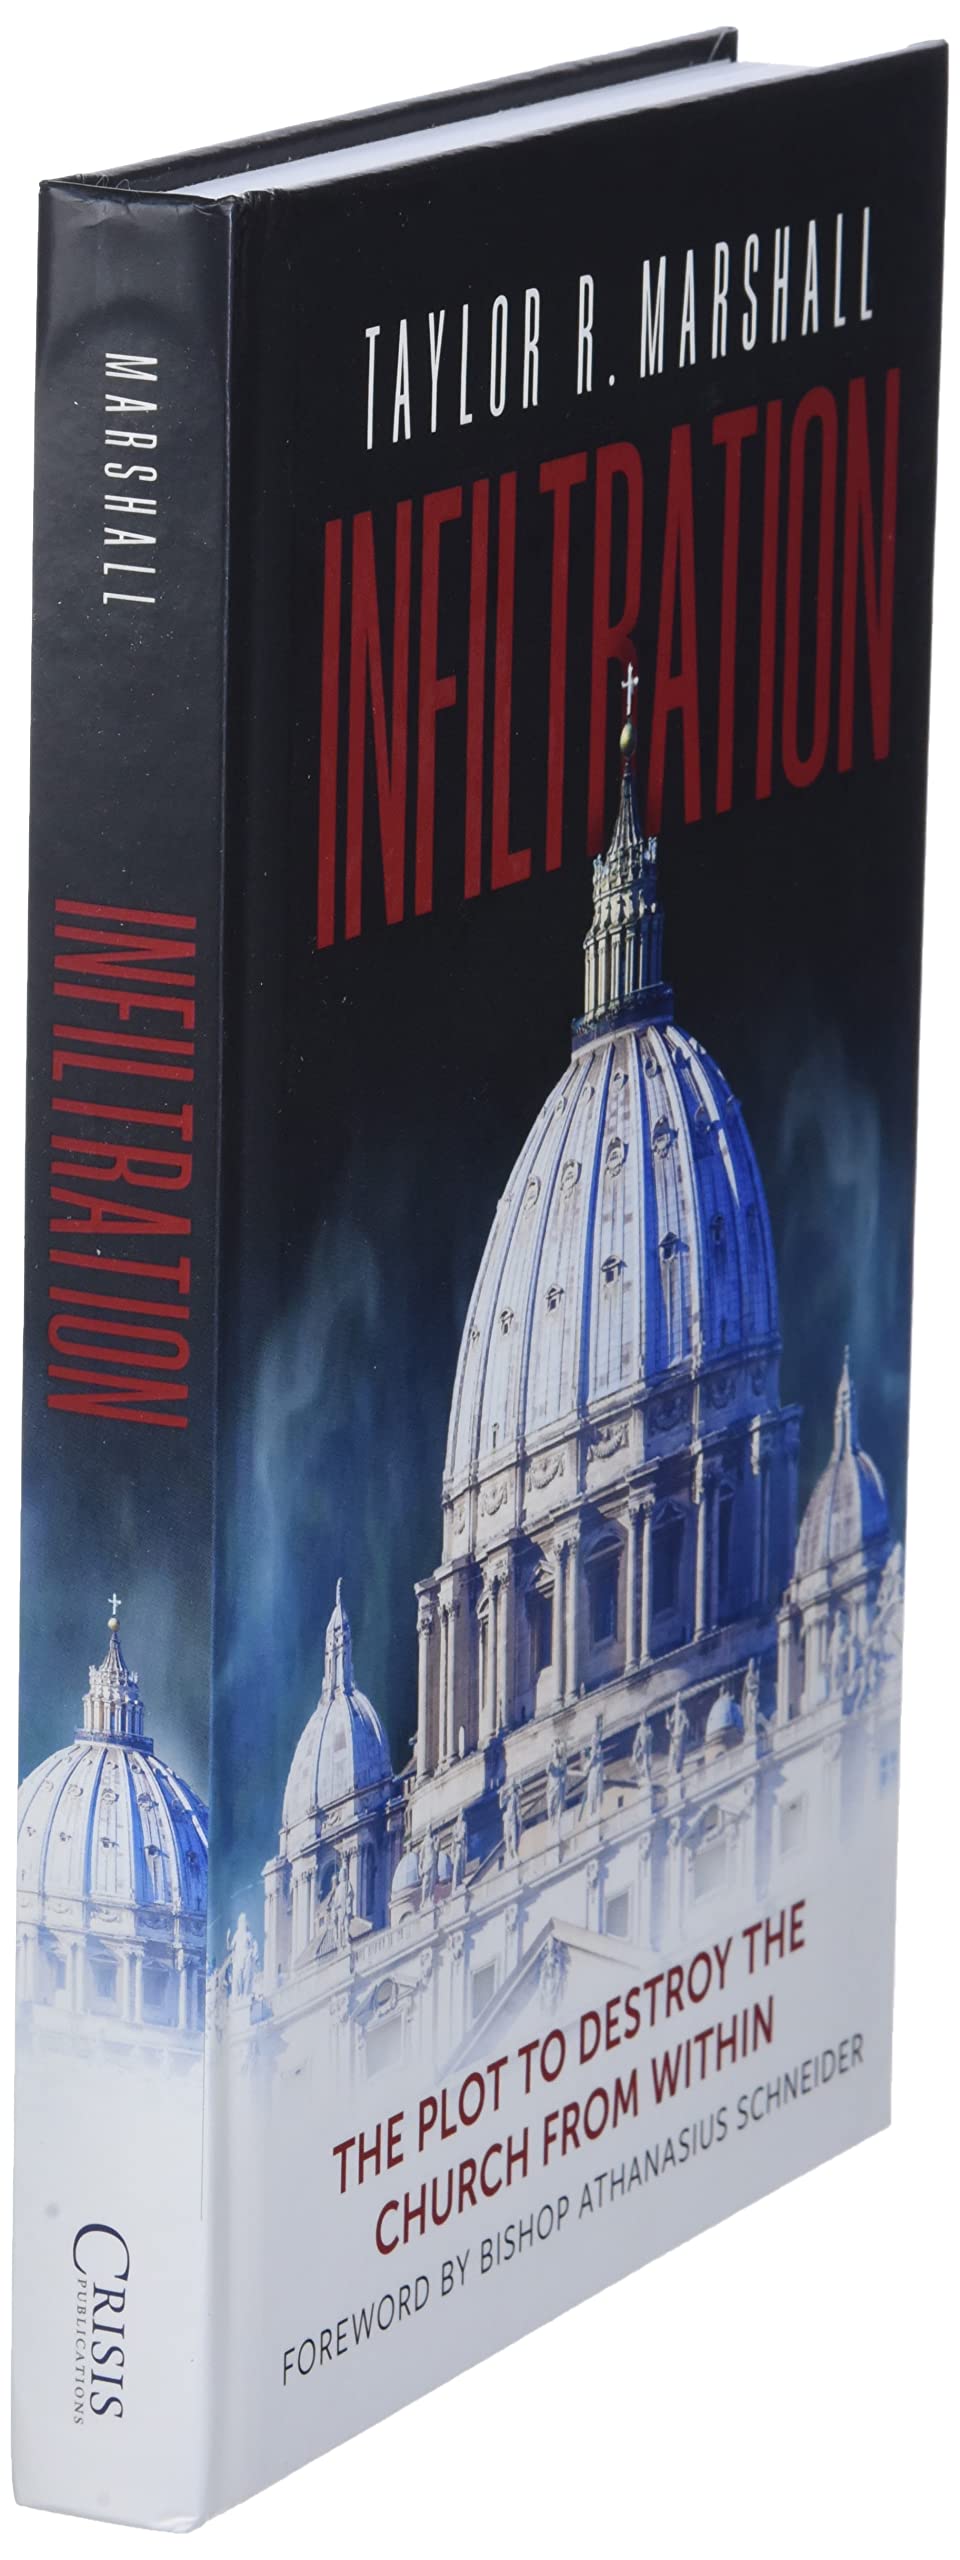 Infiltration: The Plot to Destroy the Church from Within